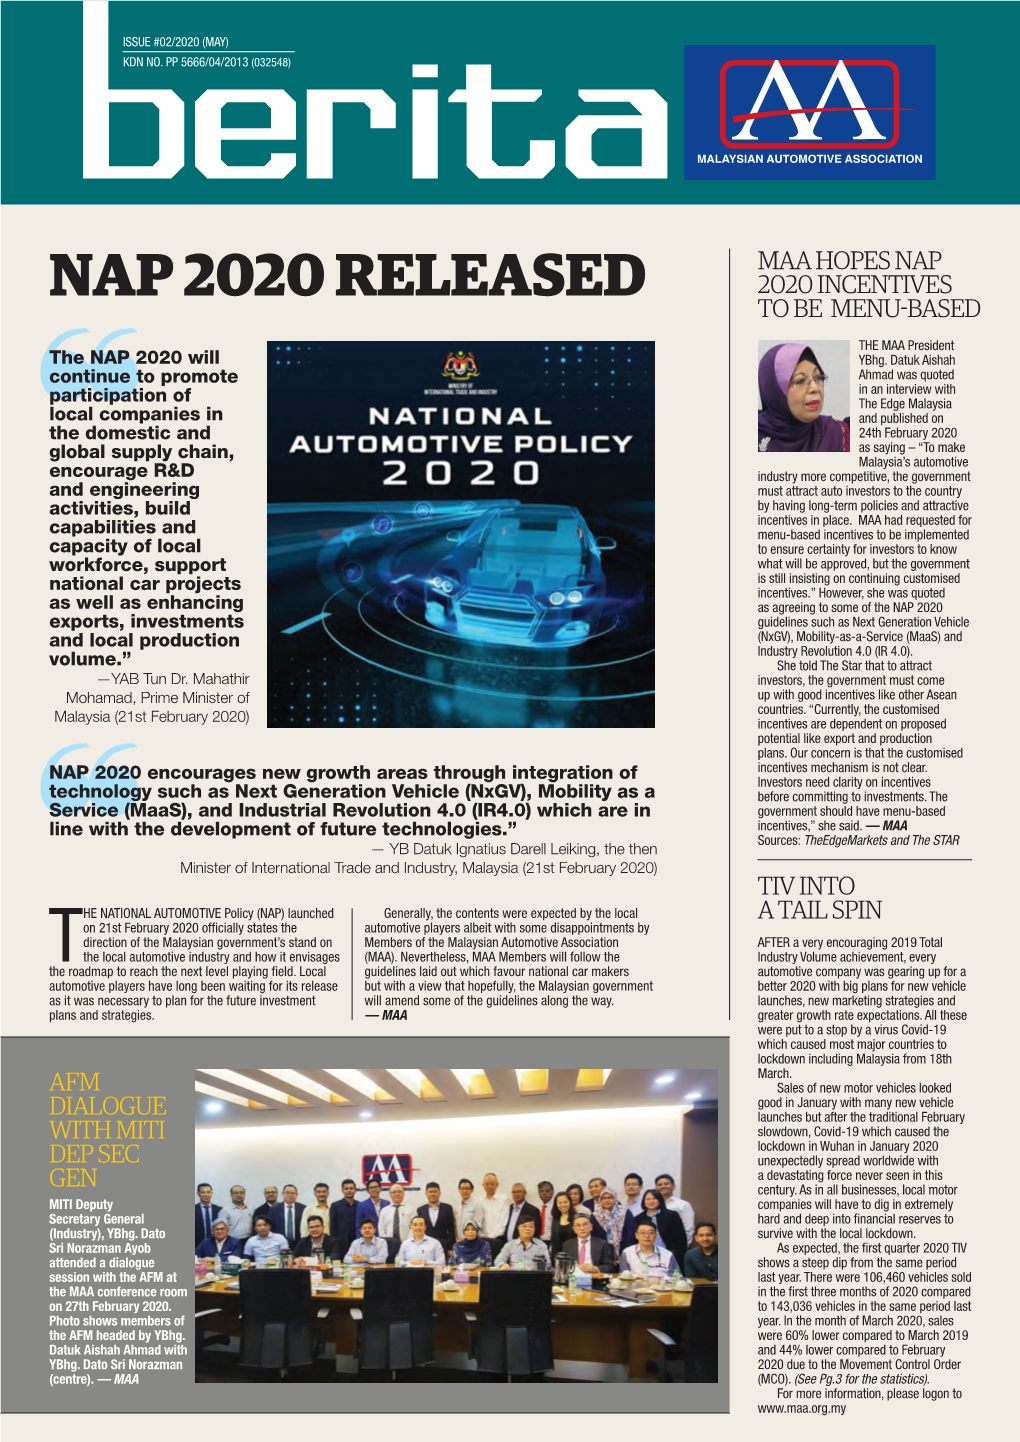 Nap 2020 Released 2020 Incentives to Be Menu-Based